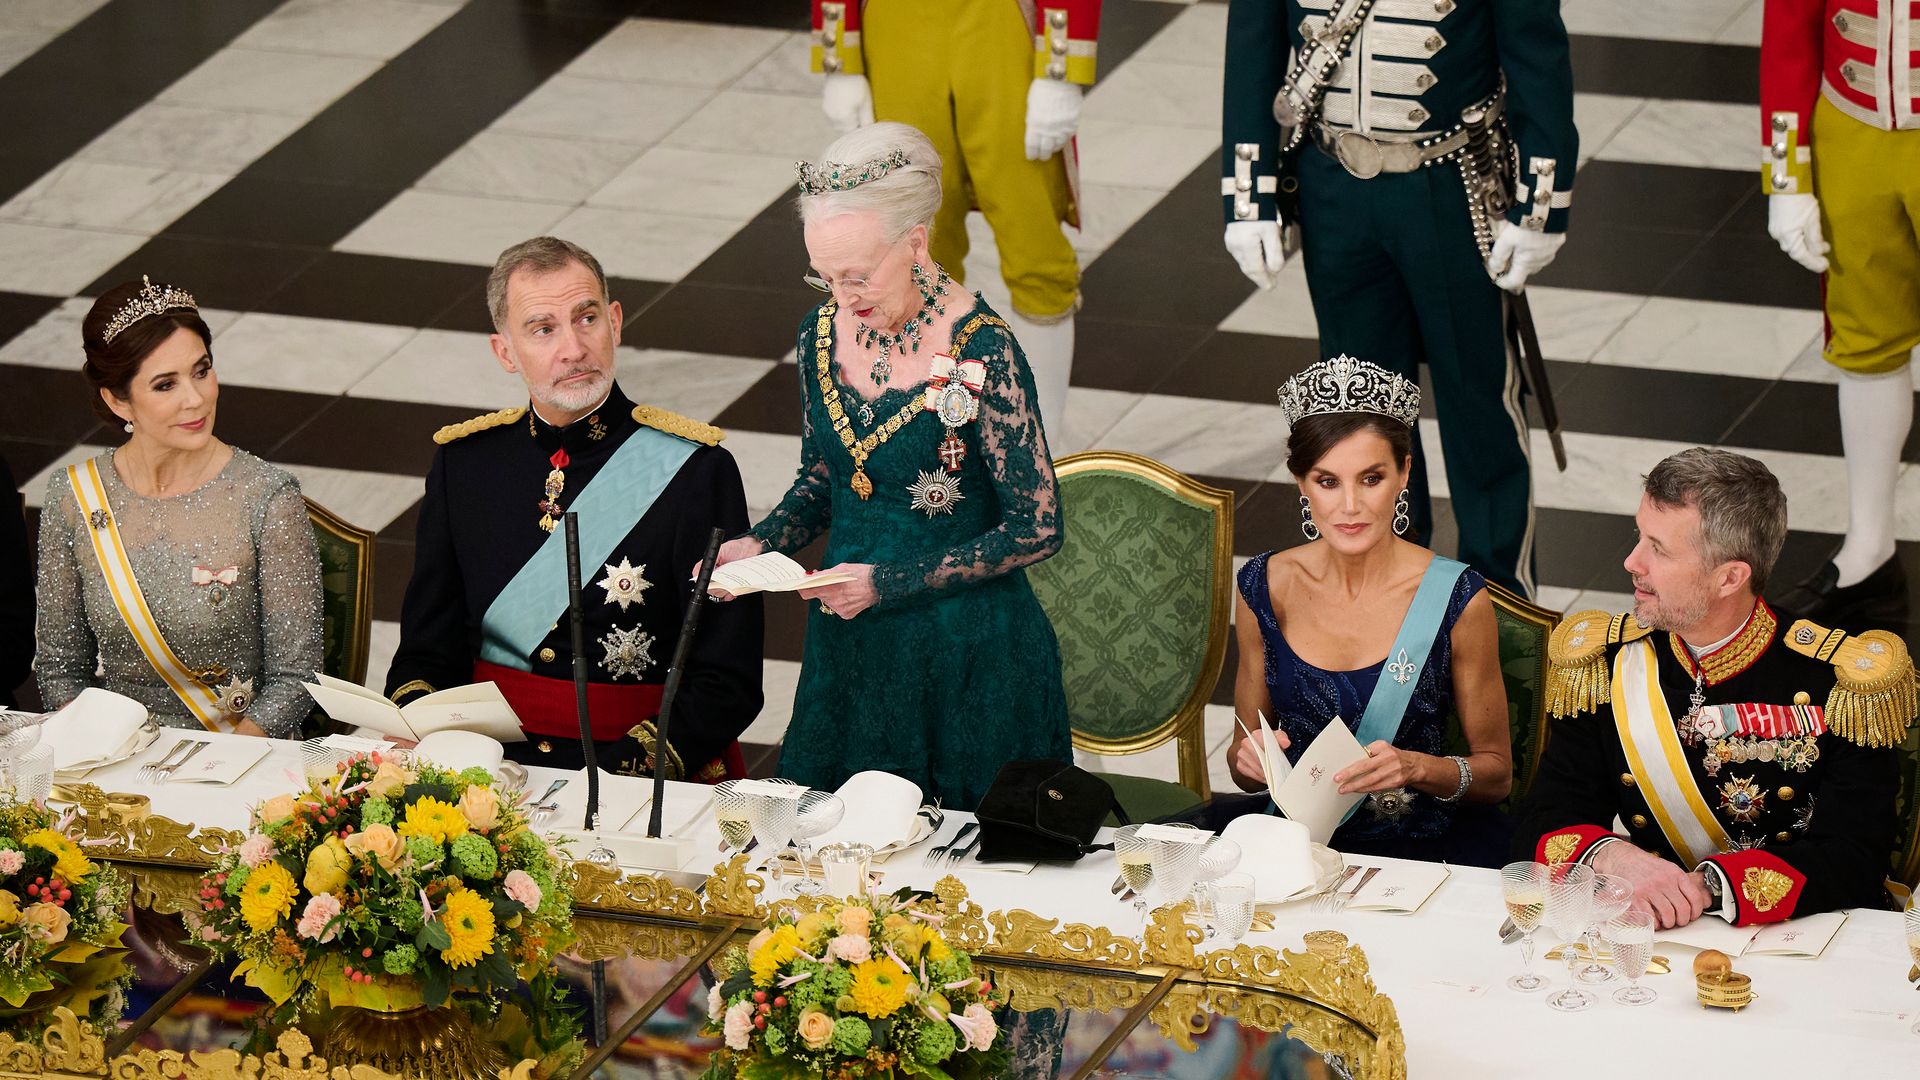 Queen Margrethe gave a speech during the dinner